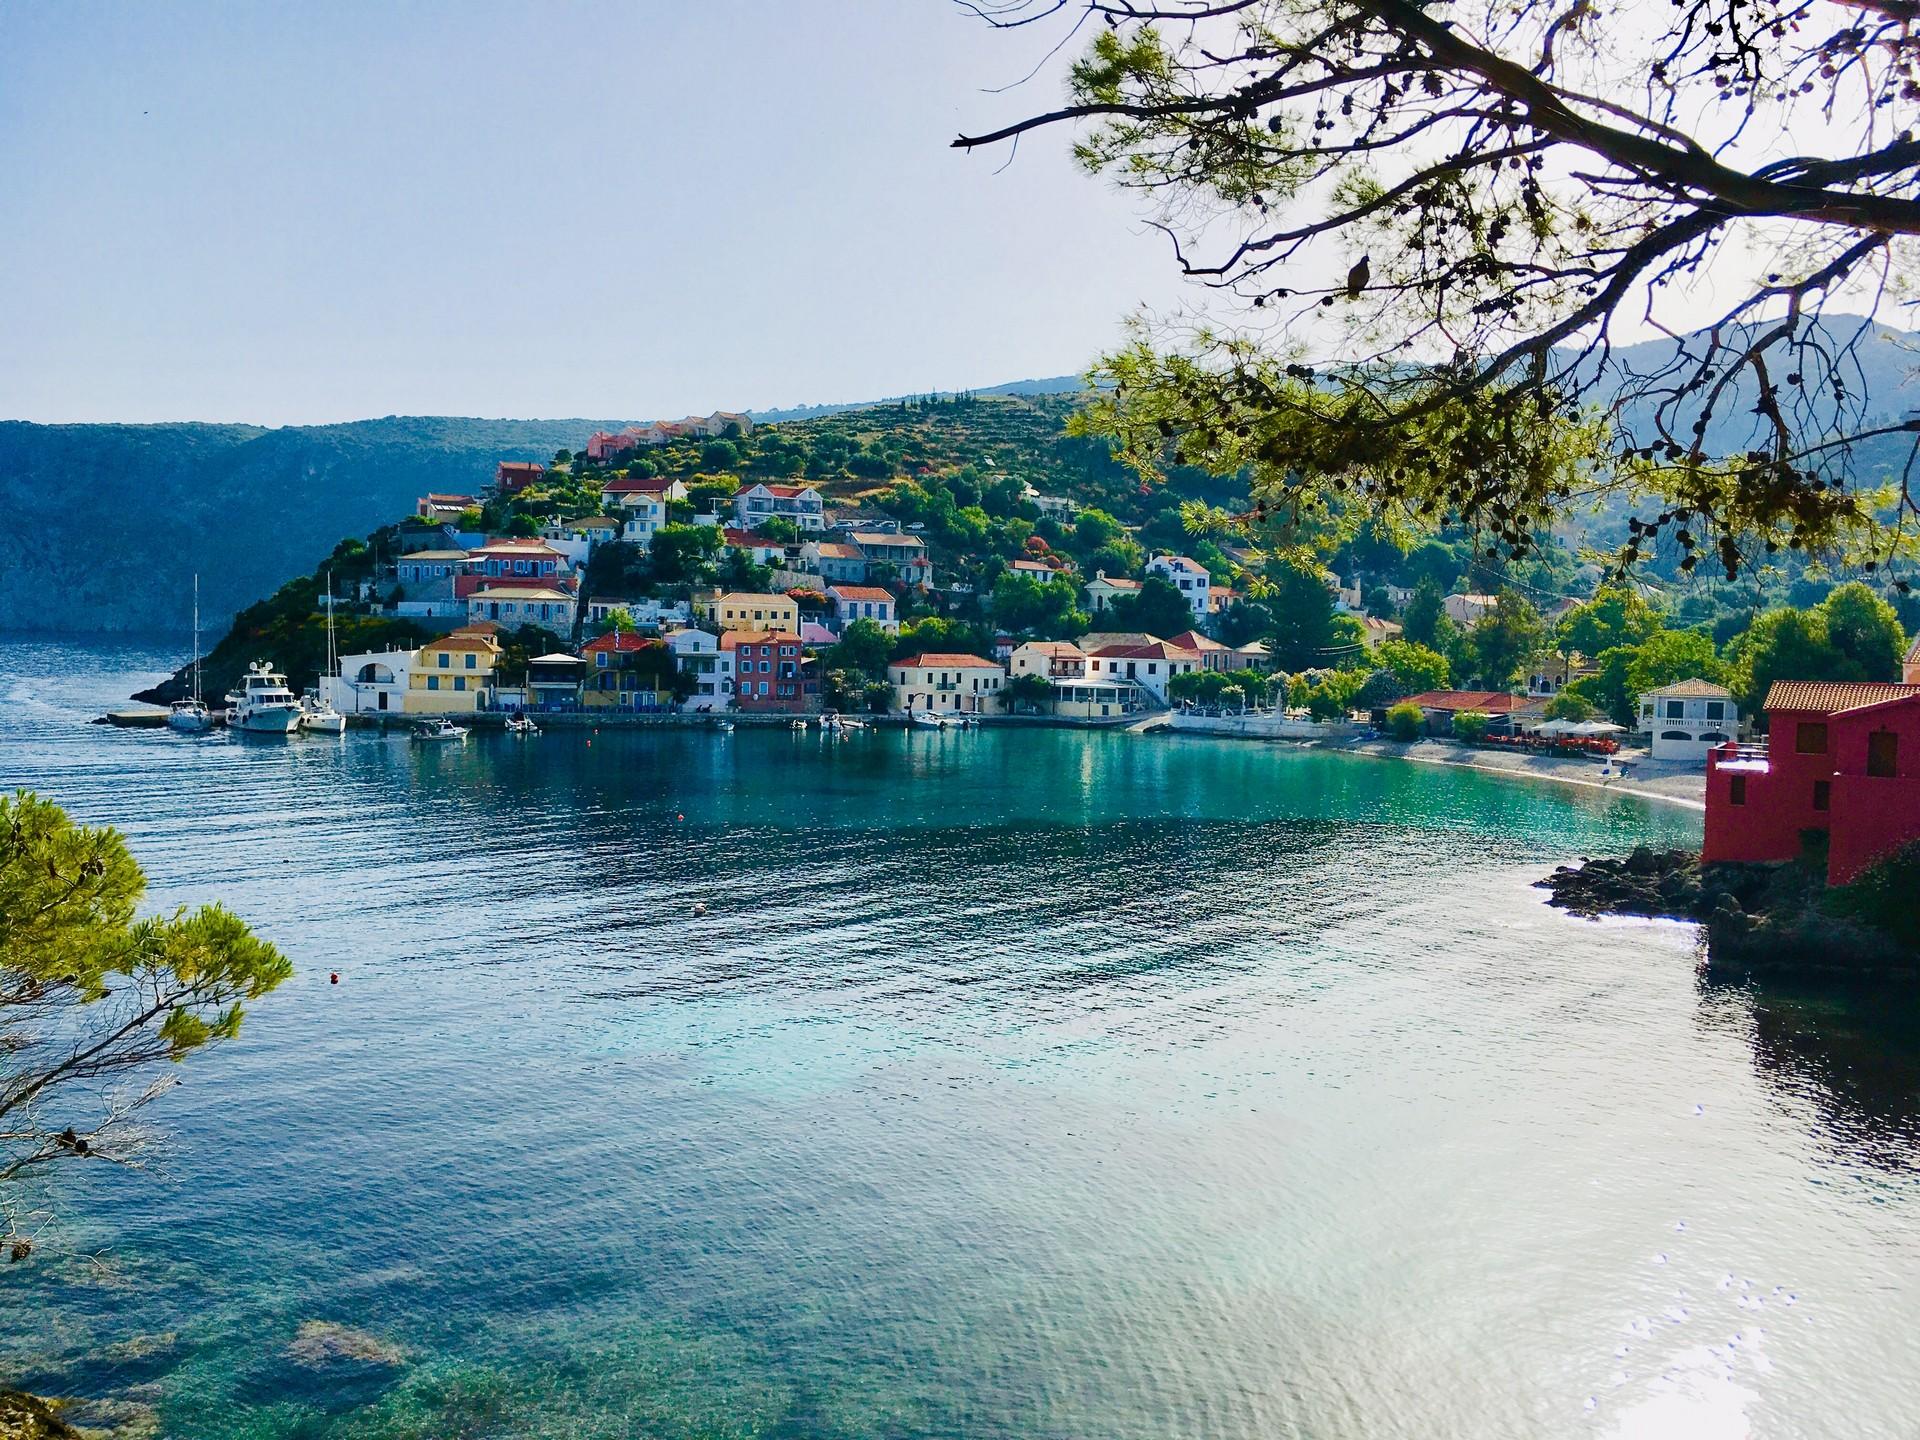 Picturesque village at the foot of the hill by the sea on Greece West Coast.